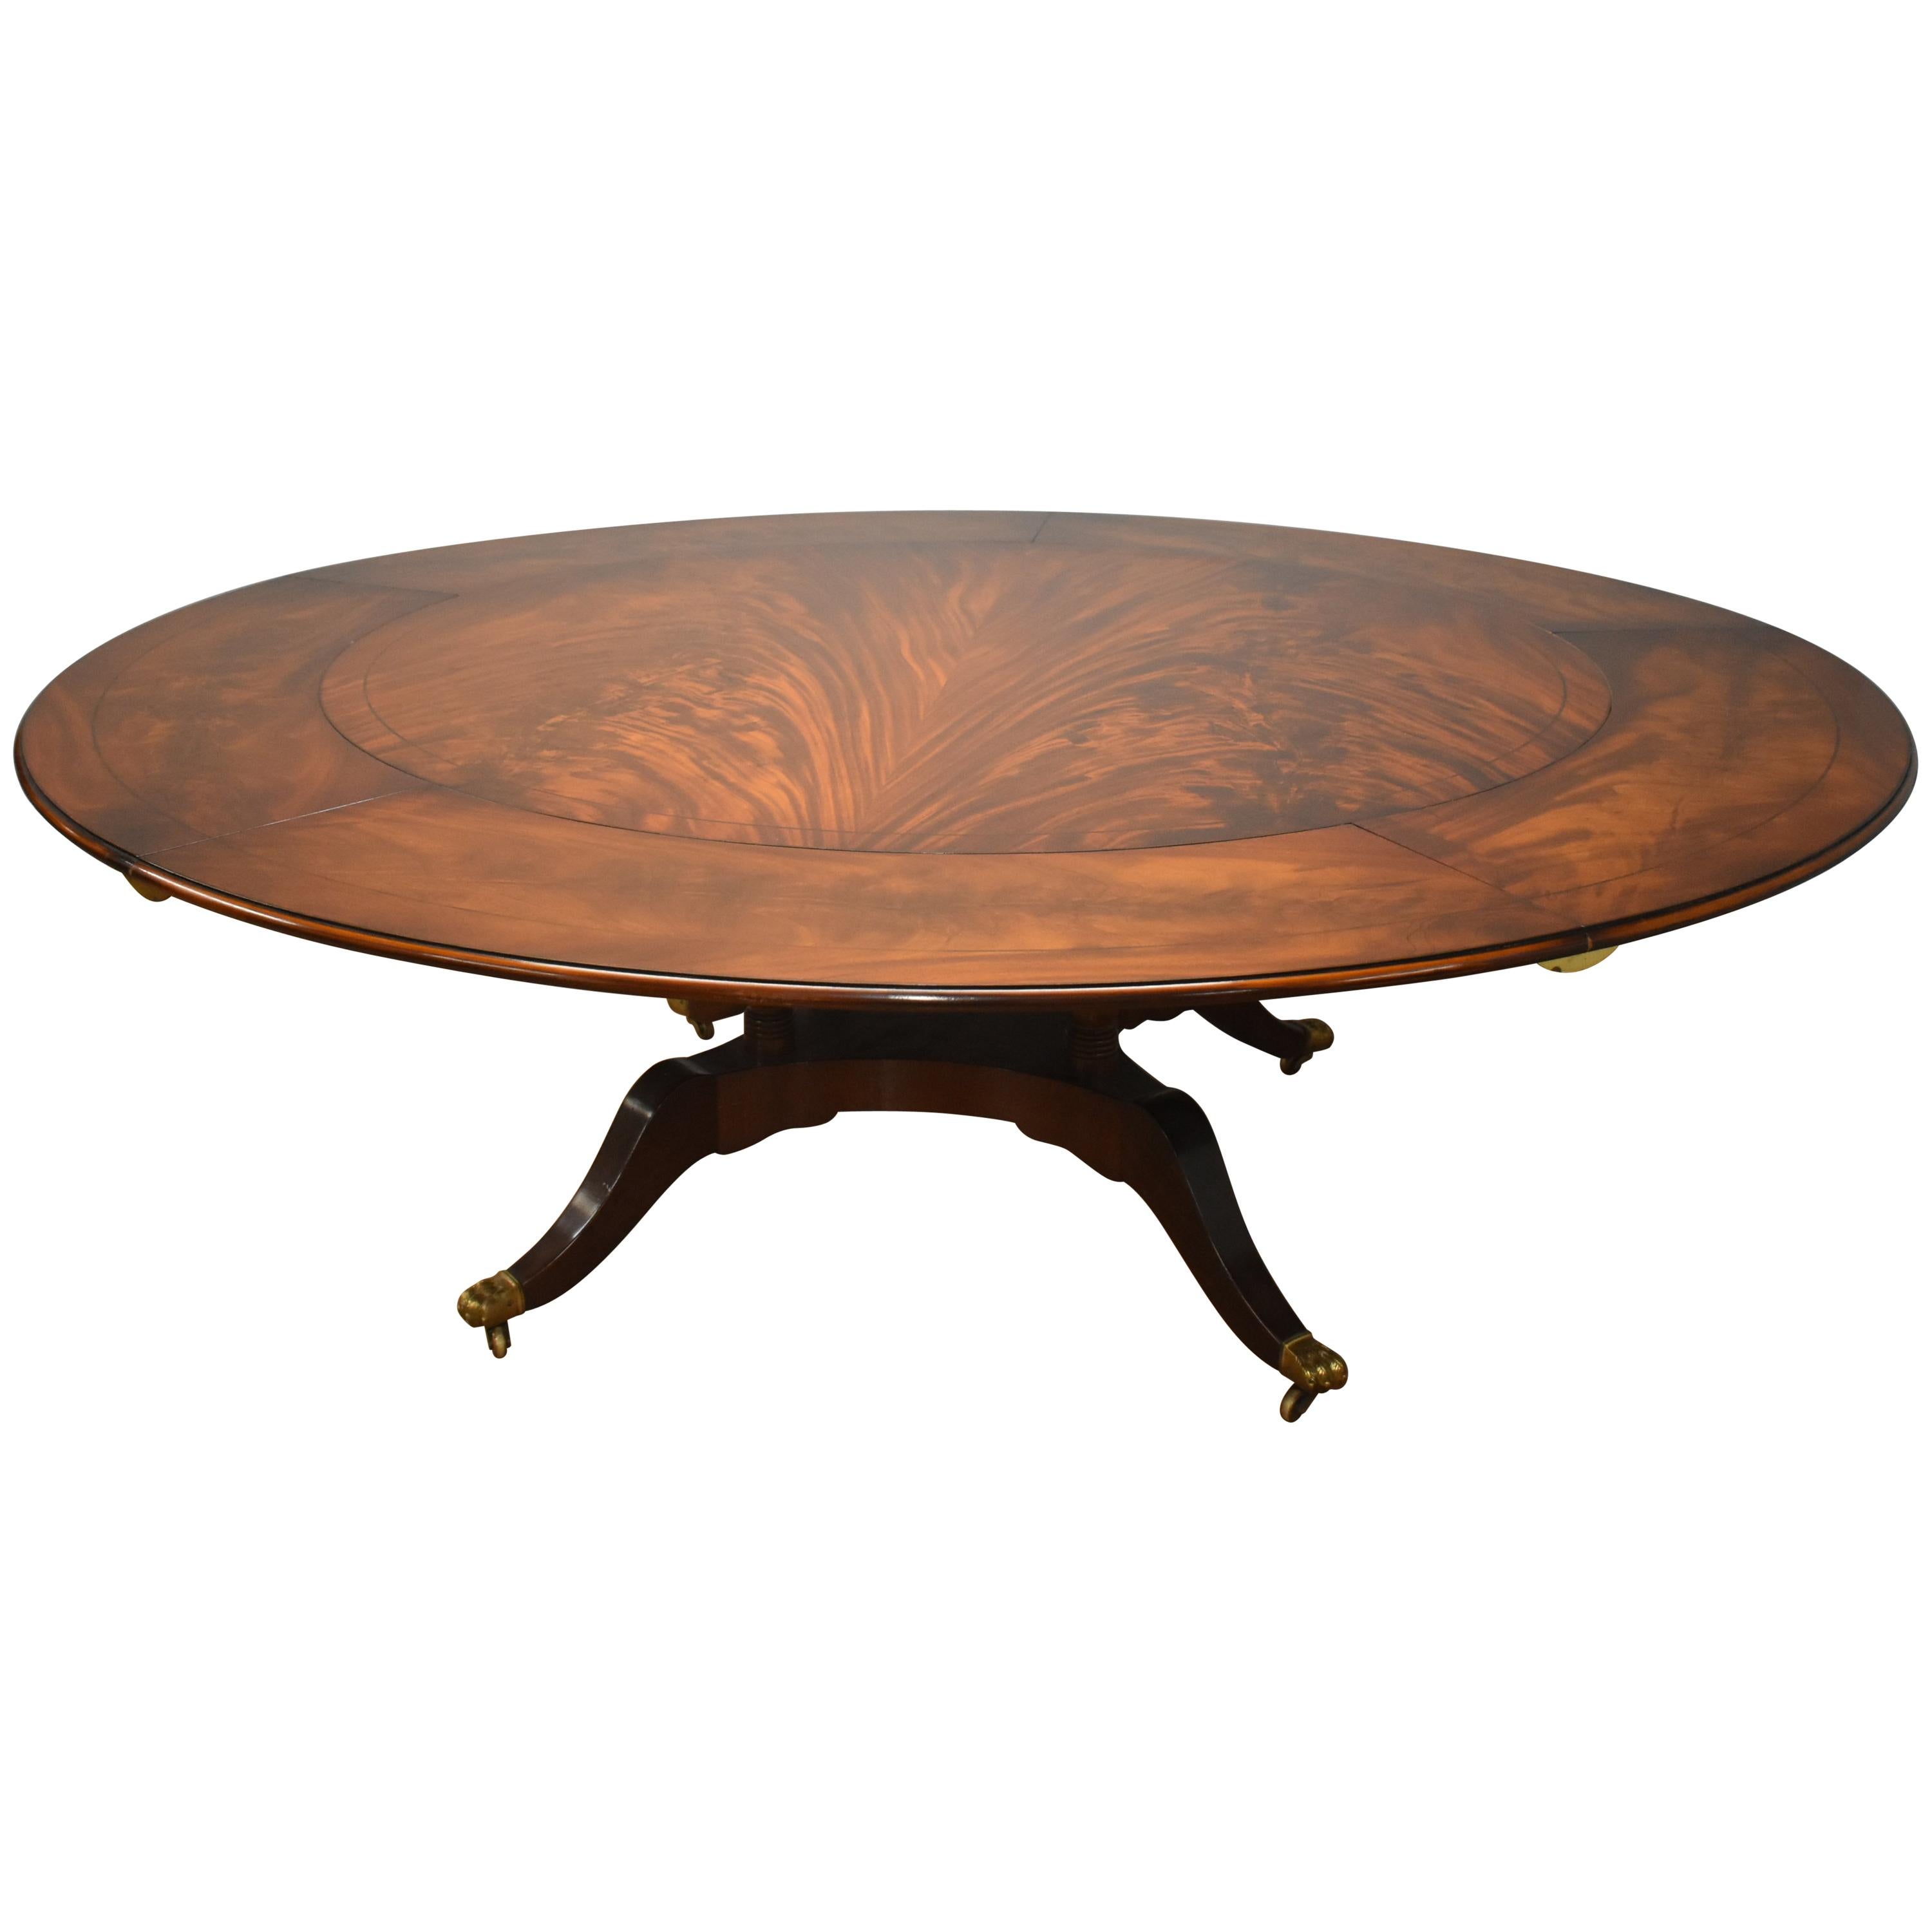 20th Century George III Style Flame Mahogany 12 Seat Jupe Table